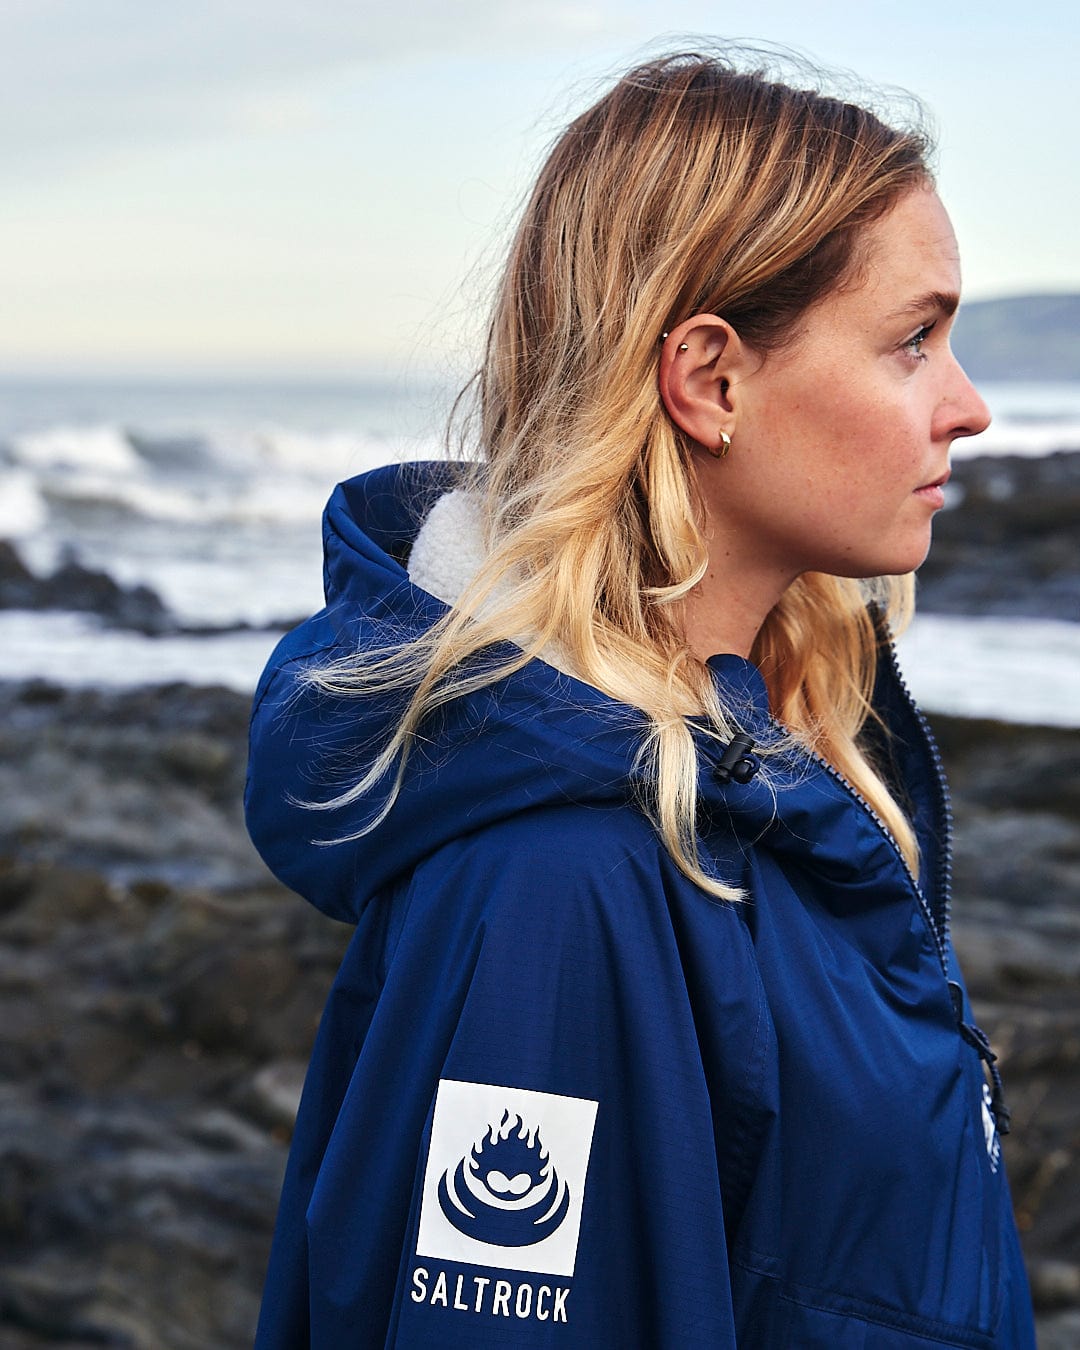 Profile of a woman wearing a blue Saltrock Recycled Four Seasons Changing Robe, looking out over a rocky beach with waves in the background.